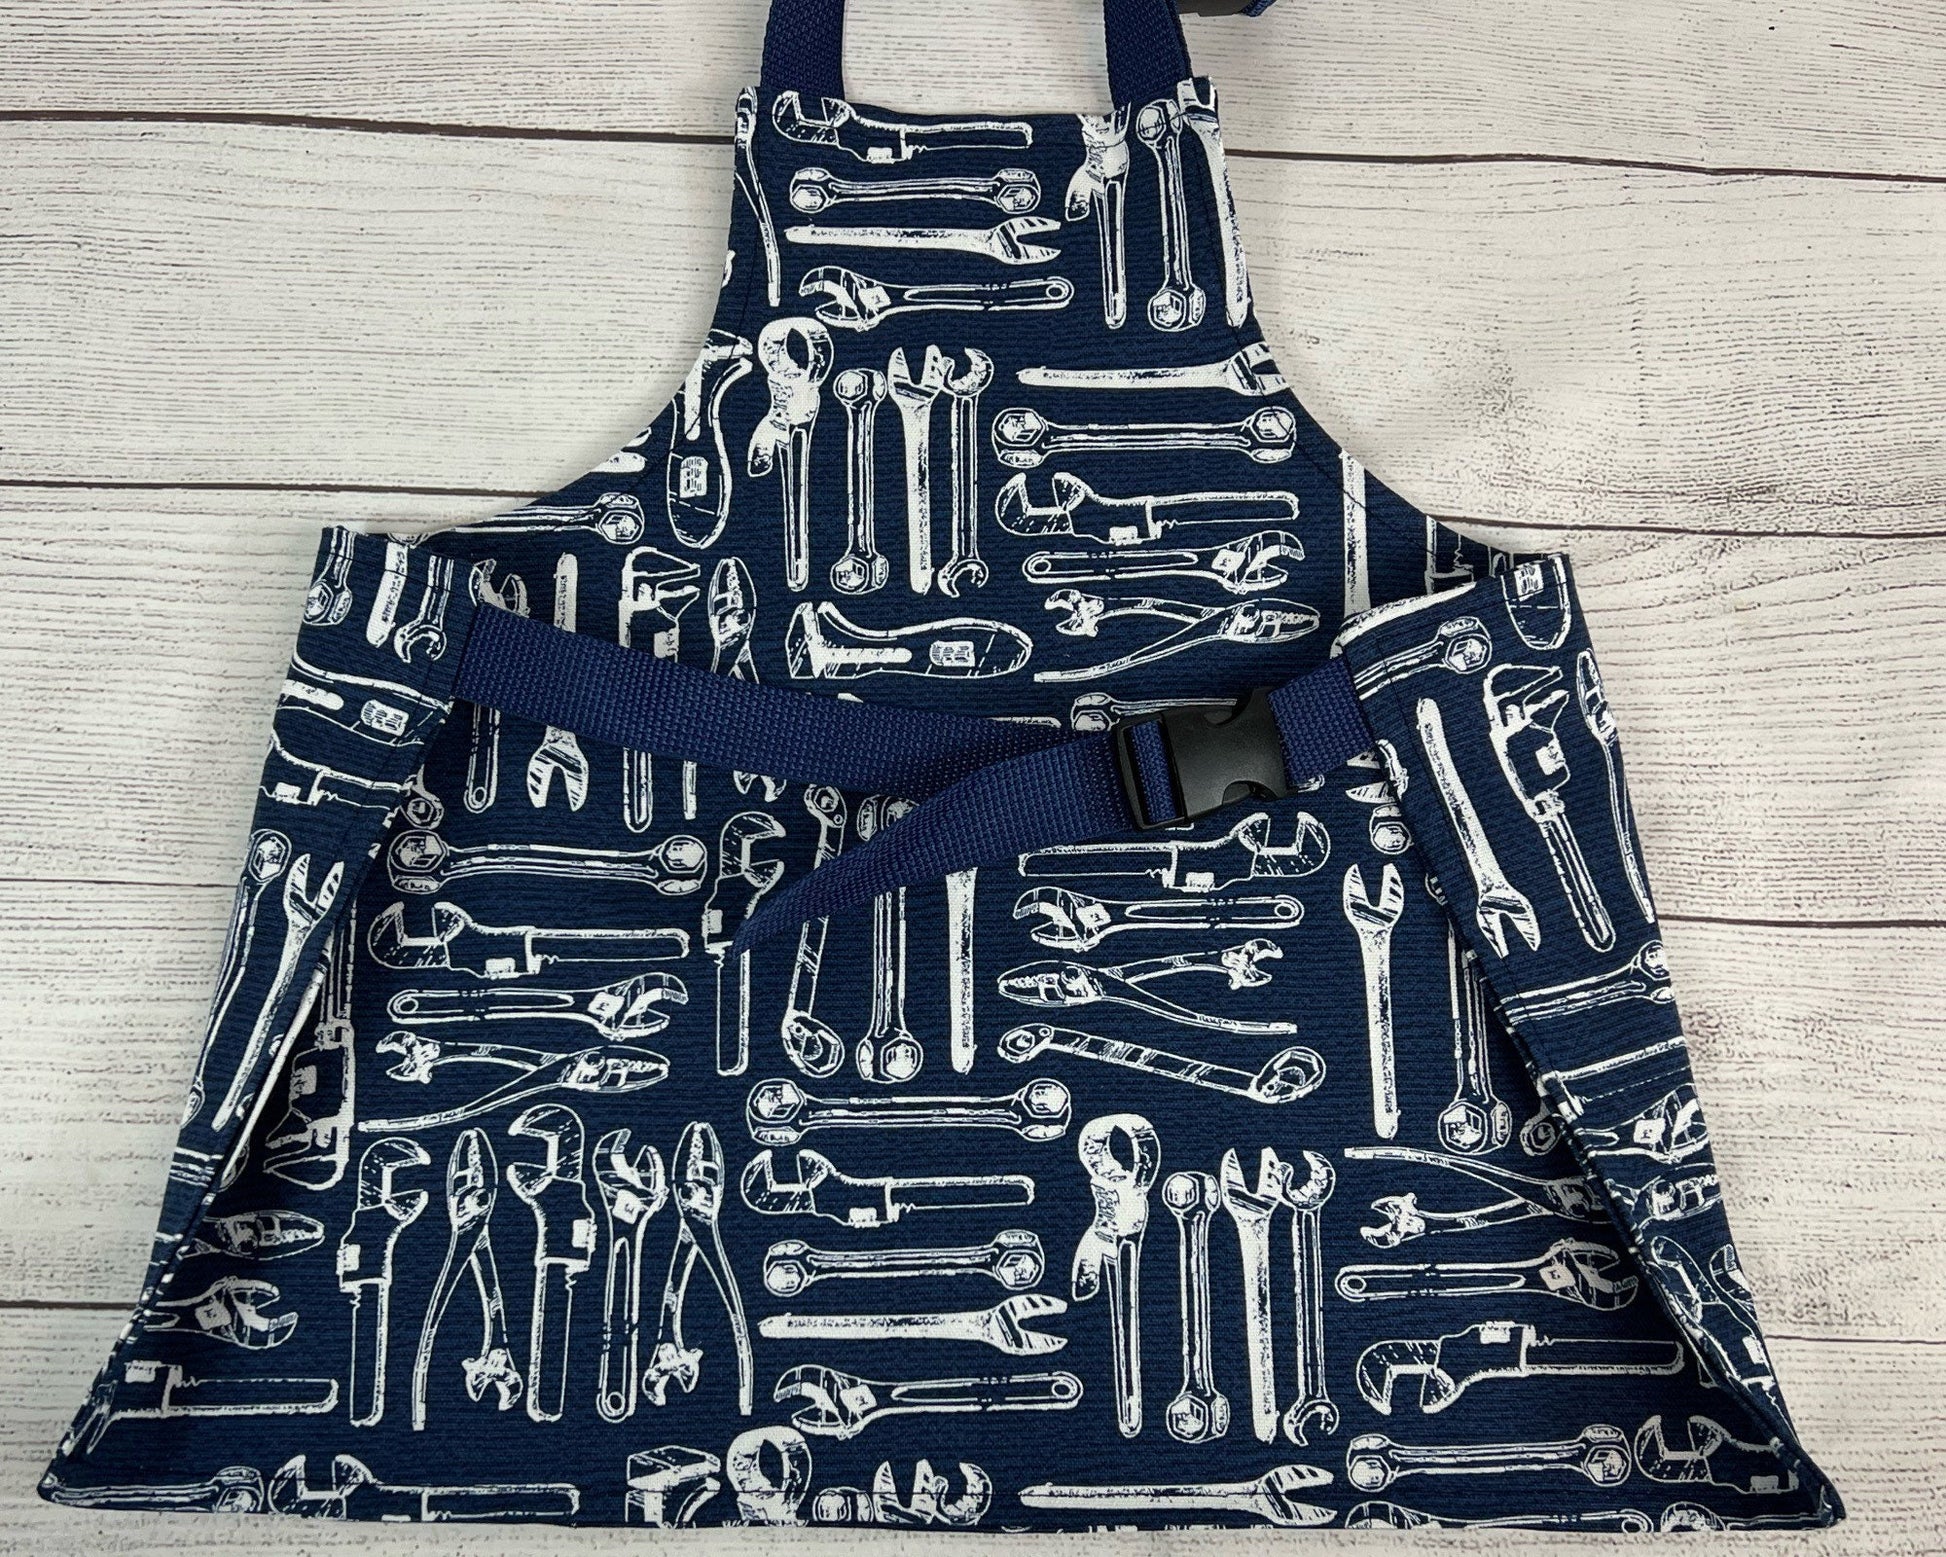 Toddler Apron - Kitchen - Cooking - Early Cooking Skills - Toddler Messes - Toddler Accessories - Tools - Construction - Shop - Small Apron